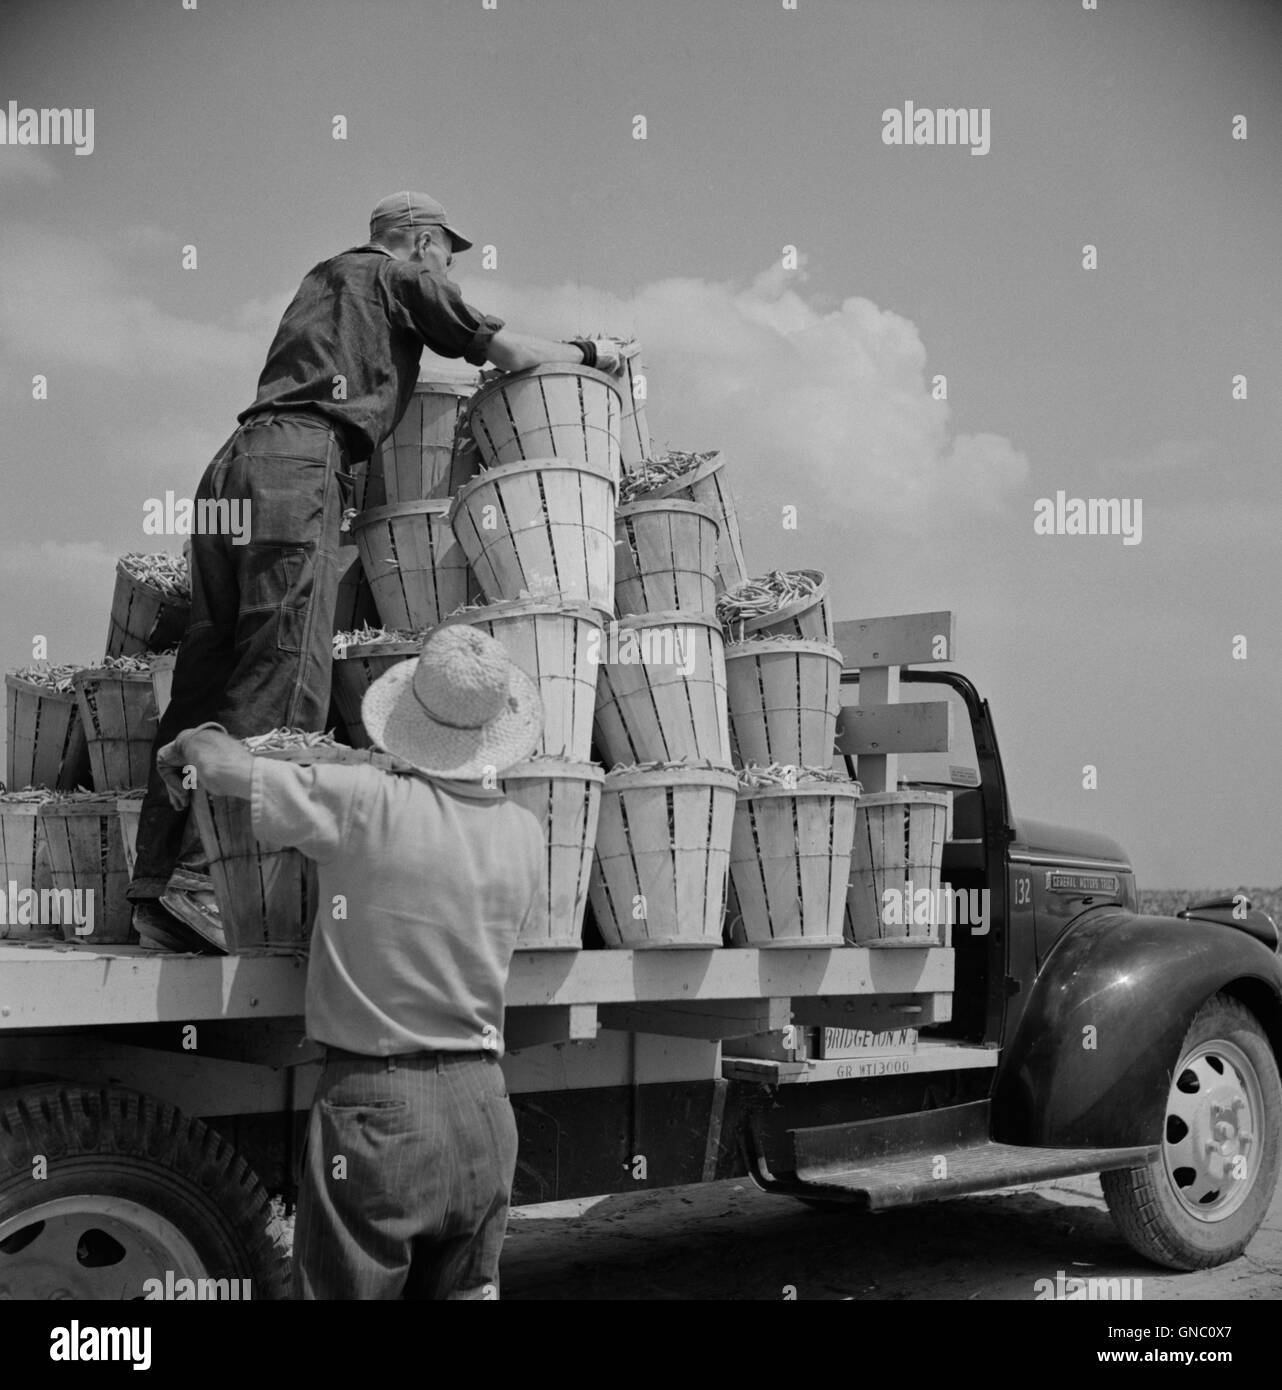 Truck Being Loaded with Bushels of String Beans by Two Day Laborers, Rear View, Seabrook Farms, Bridgeton, New Jersey, USA, Marion Post Wolcott, U.S. Farm Security Administration, July 1941 Stock Photo